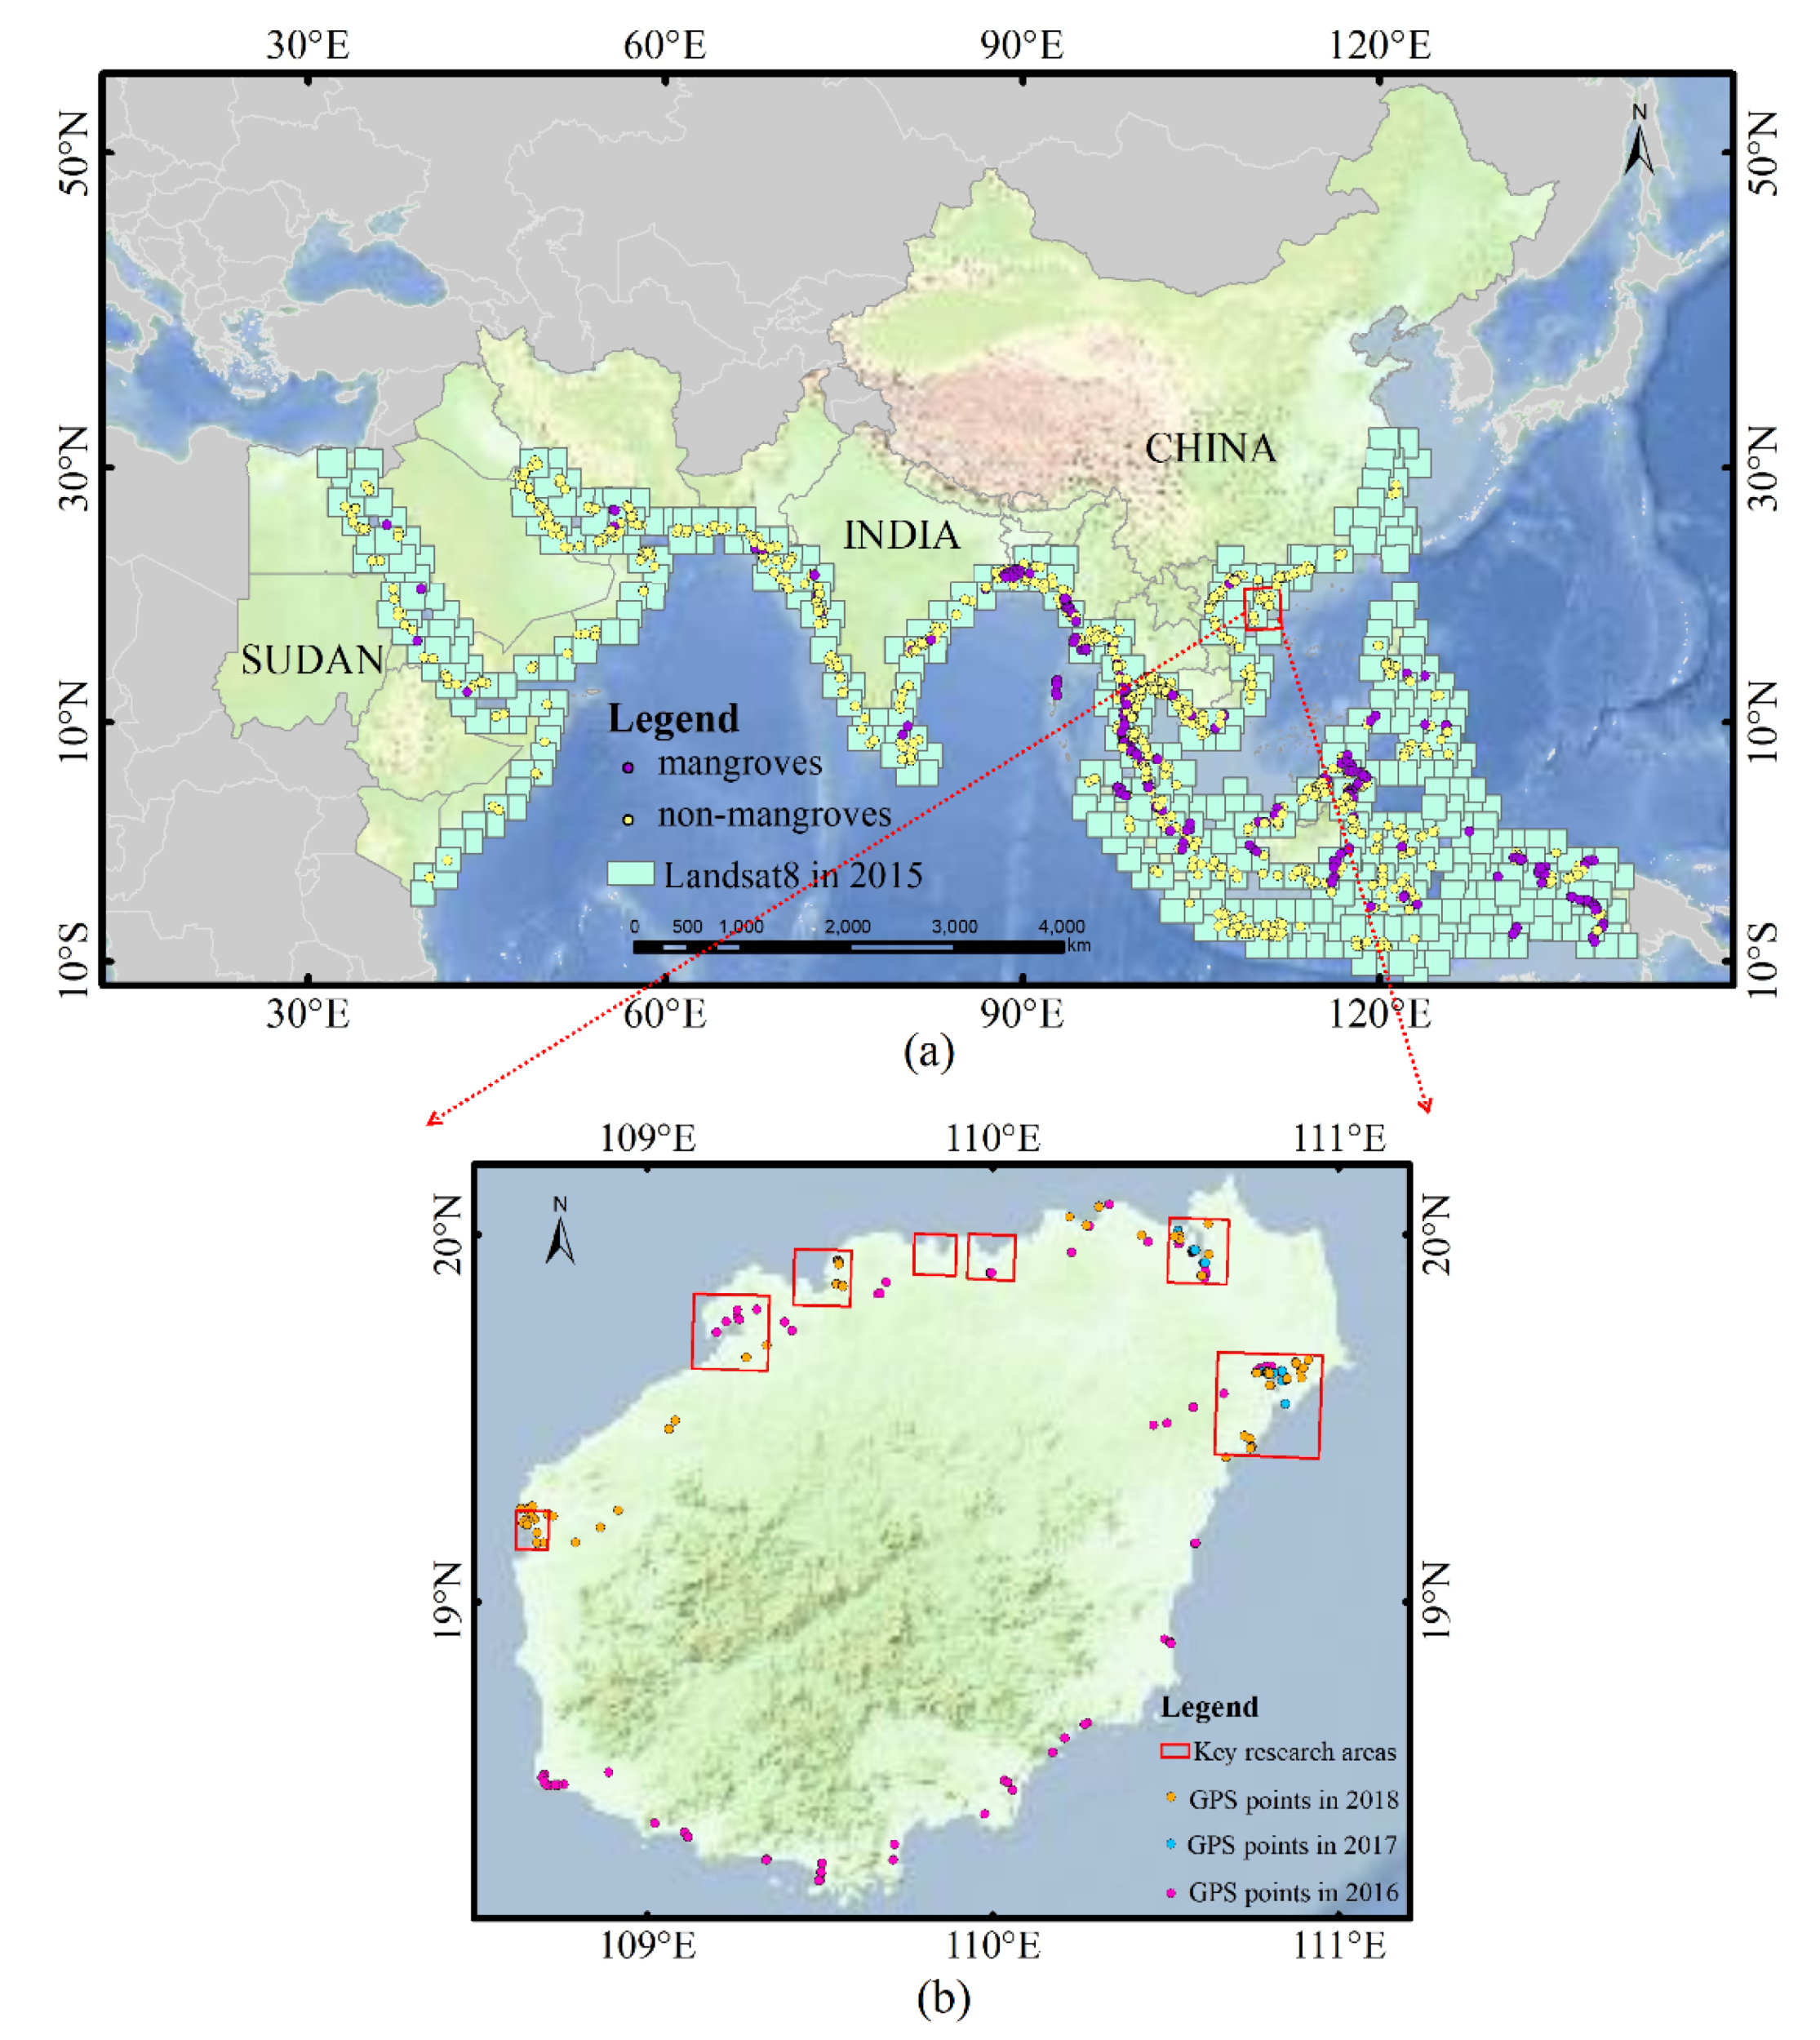 Remote Sensing | Free Full-Text | Mapping Large-Scale Mangroves along the  Maritime Silk Road from 1990 to 2015 Using a Novel Deep Learning Model and  Landsat Data